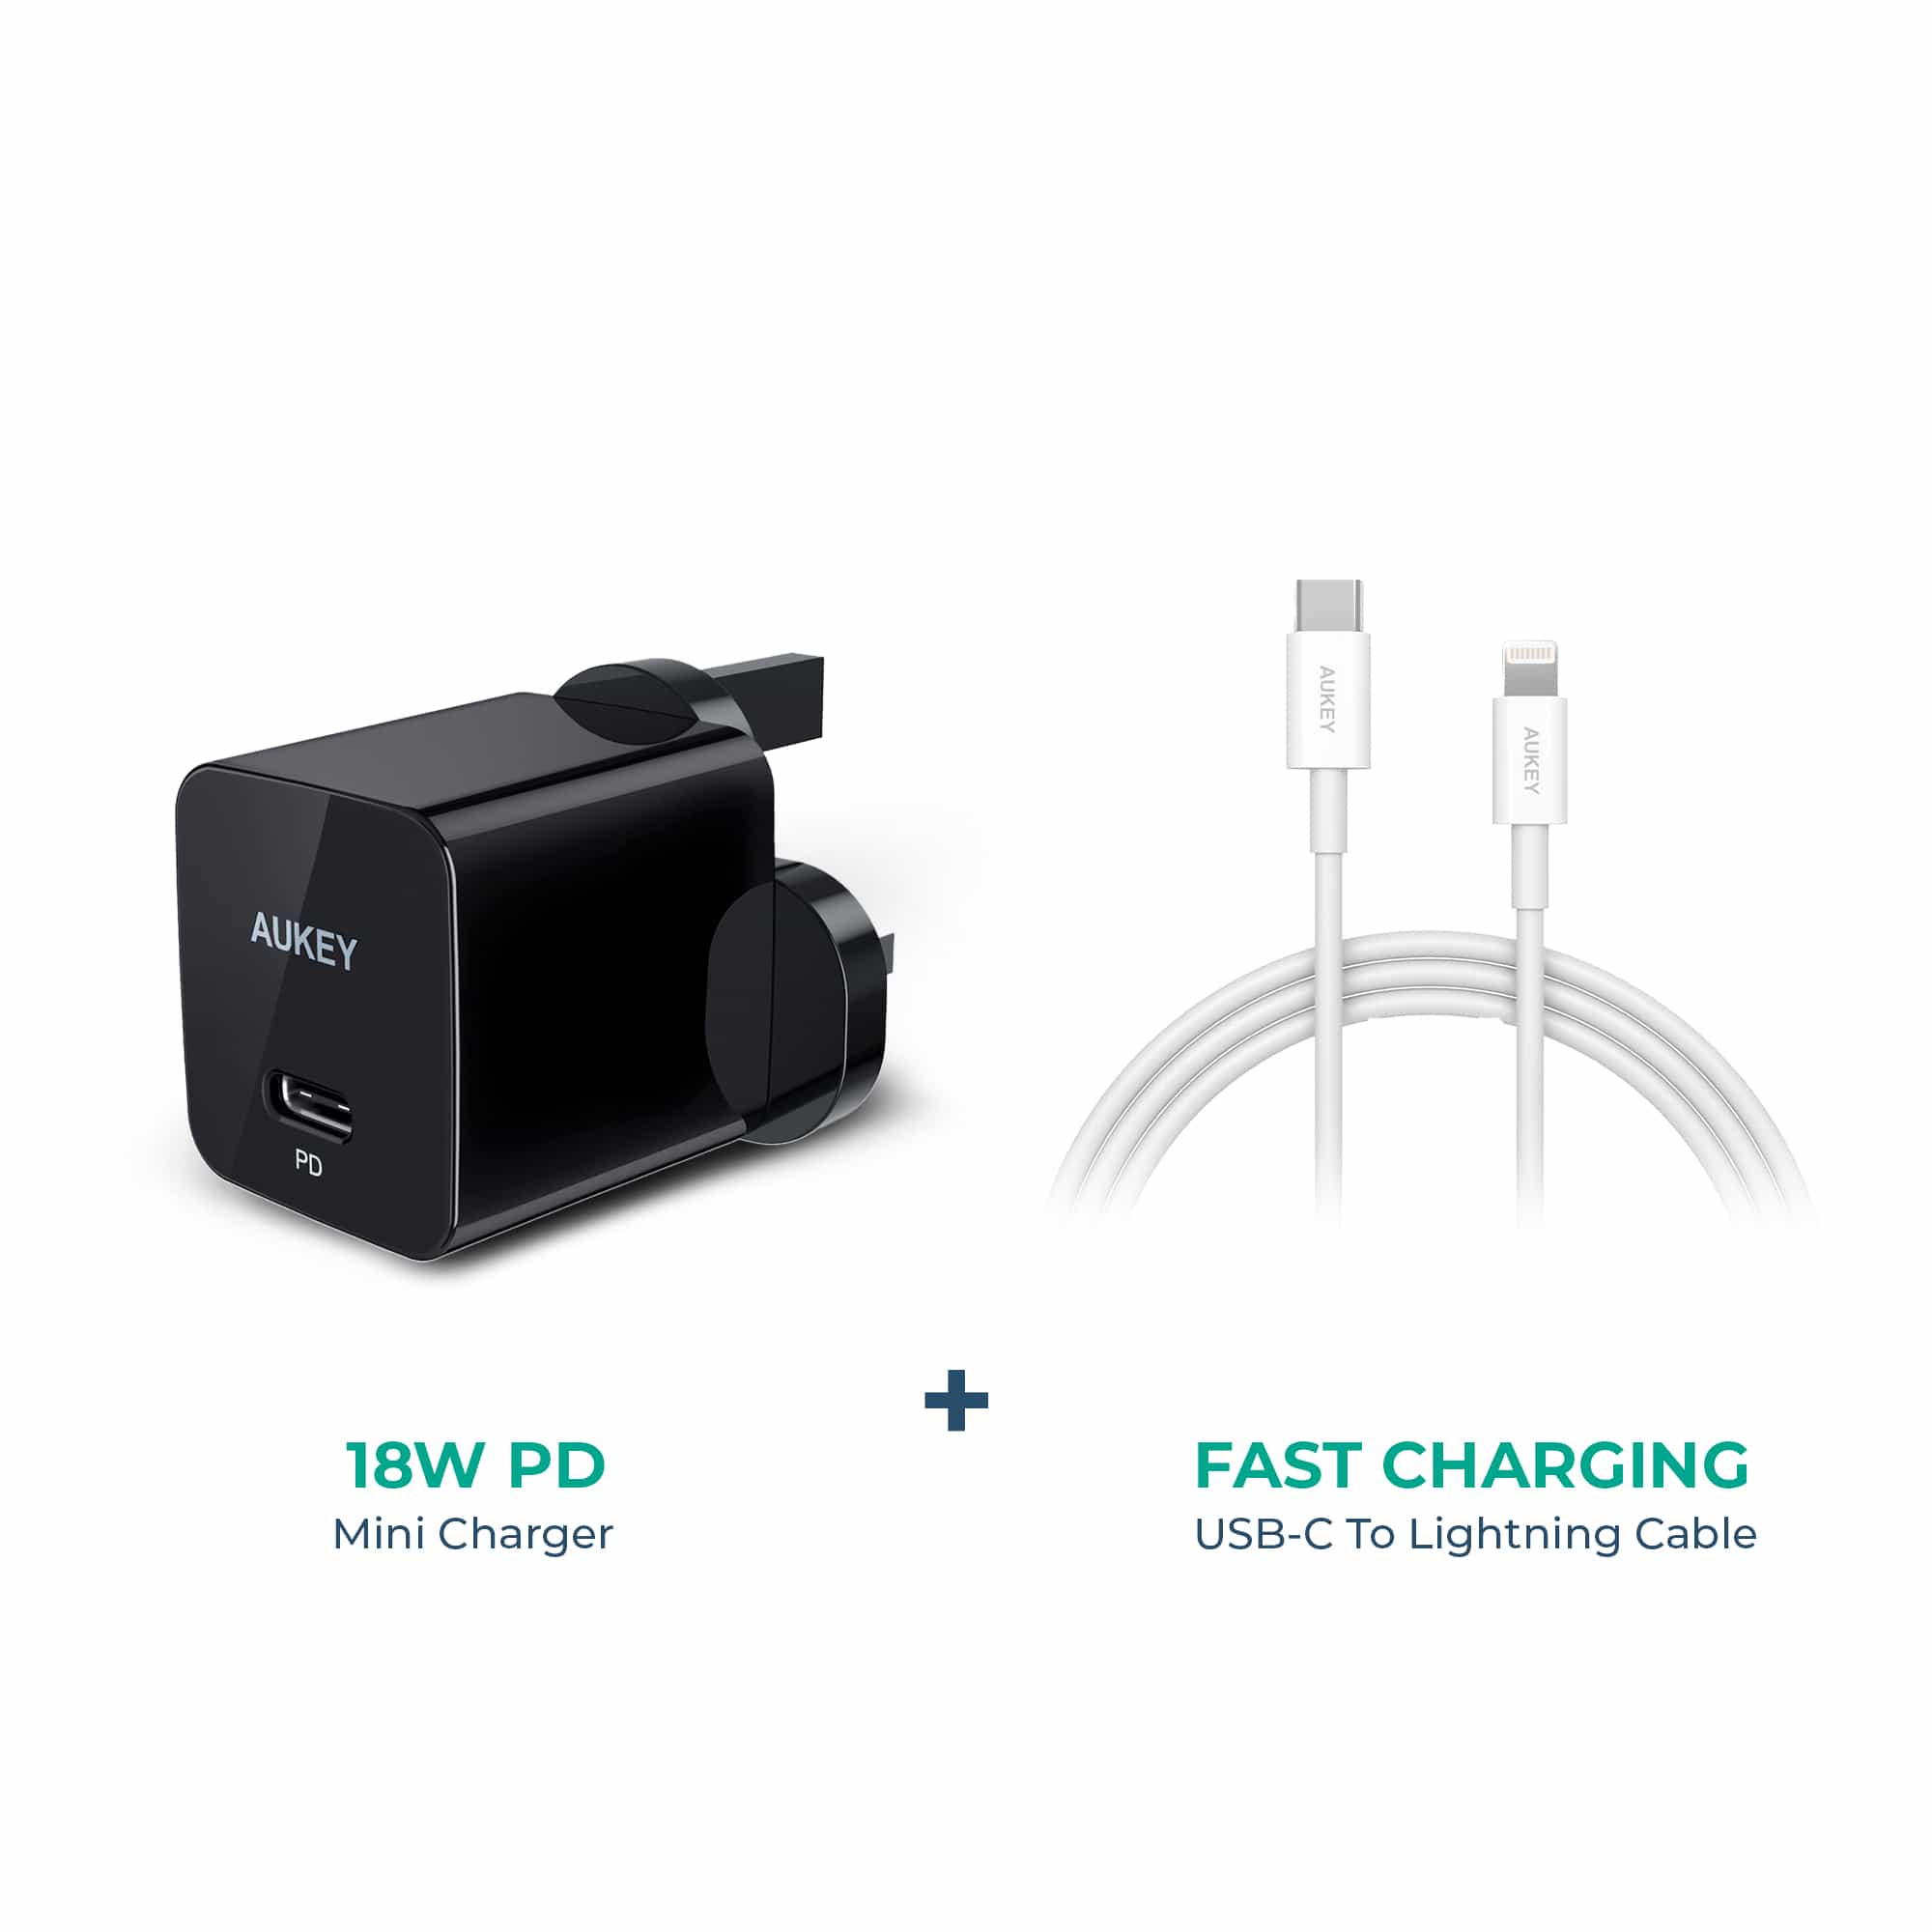 PA-Y18 Power Delivery USB-C Wall Charger With CB-CL1 USB C To Lightning Cable